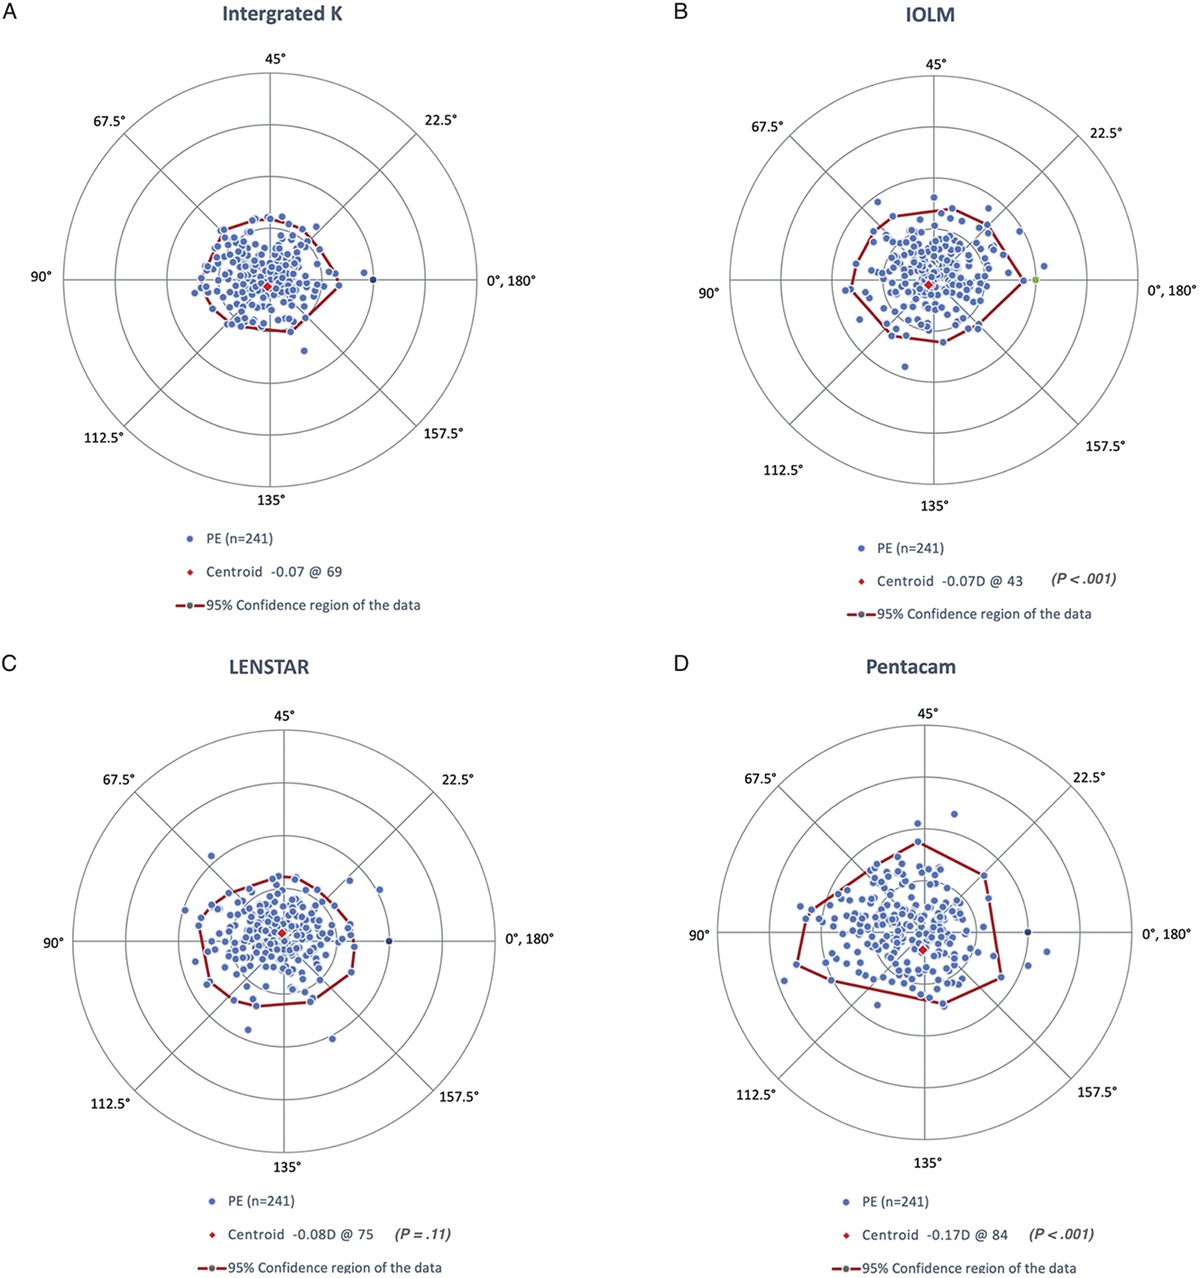 Comparison of toric intraocular lens calculation with the integrated K method and three single biometric devices